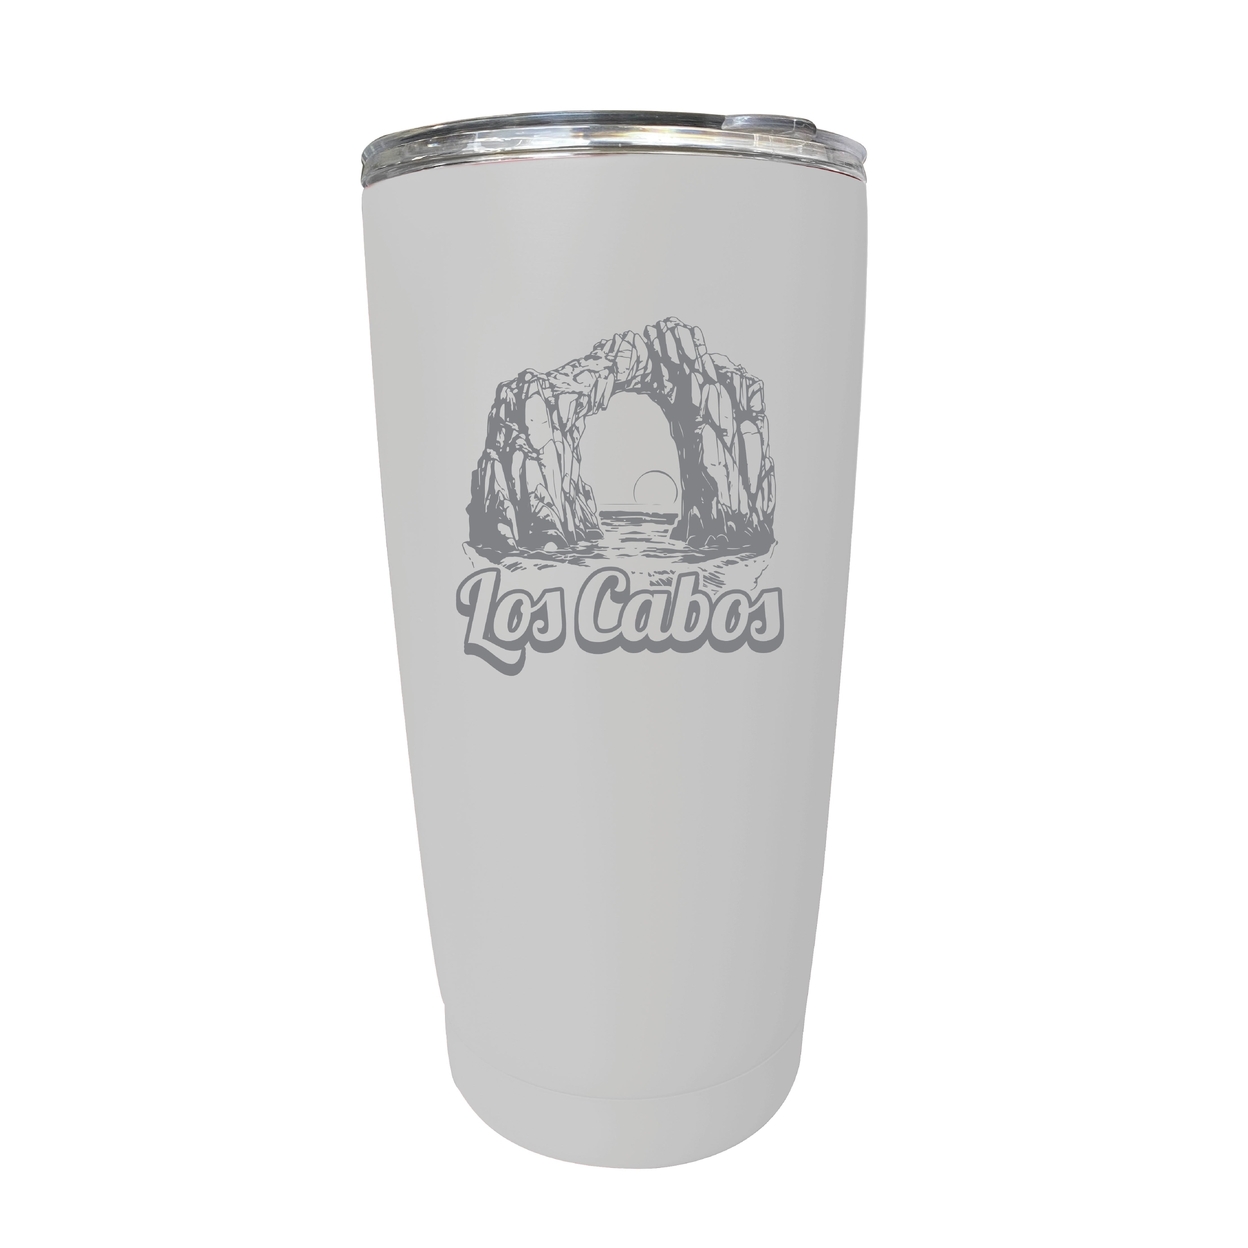 Los Cabos Mexico Souvenir 16 Oz Engraved Stainless Steel Insulated Tumbler - Red,,4-Pack